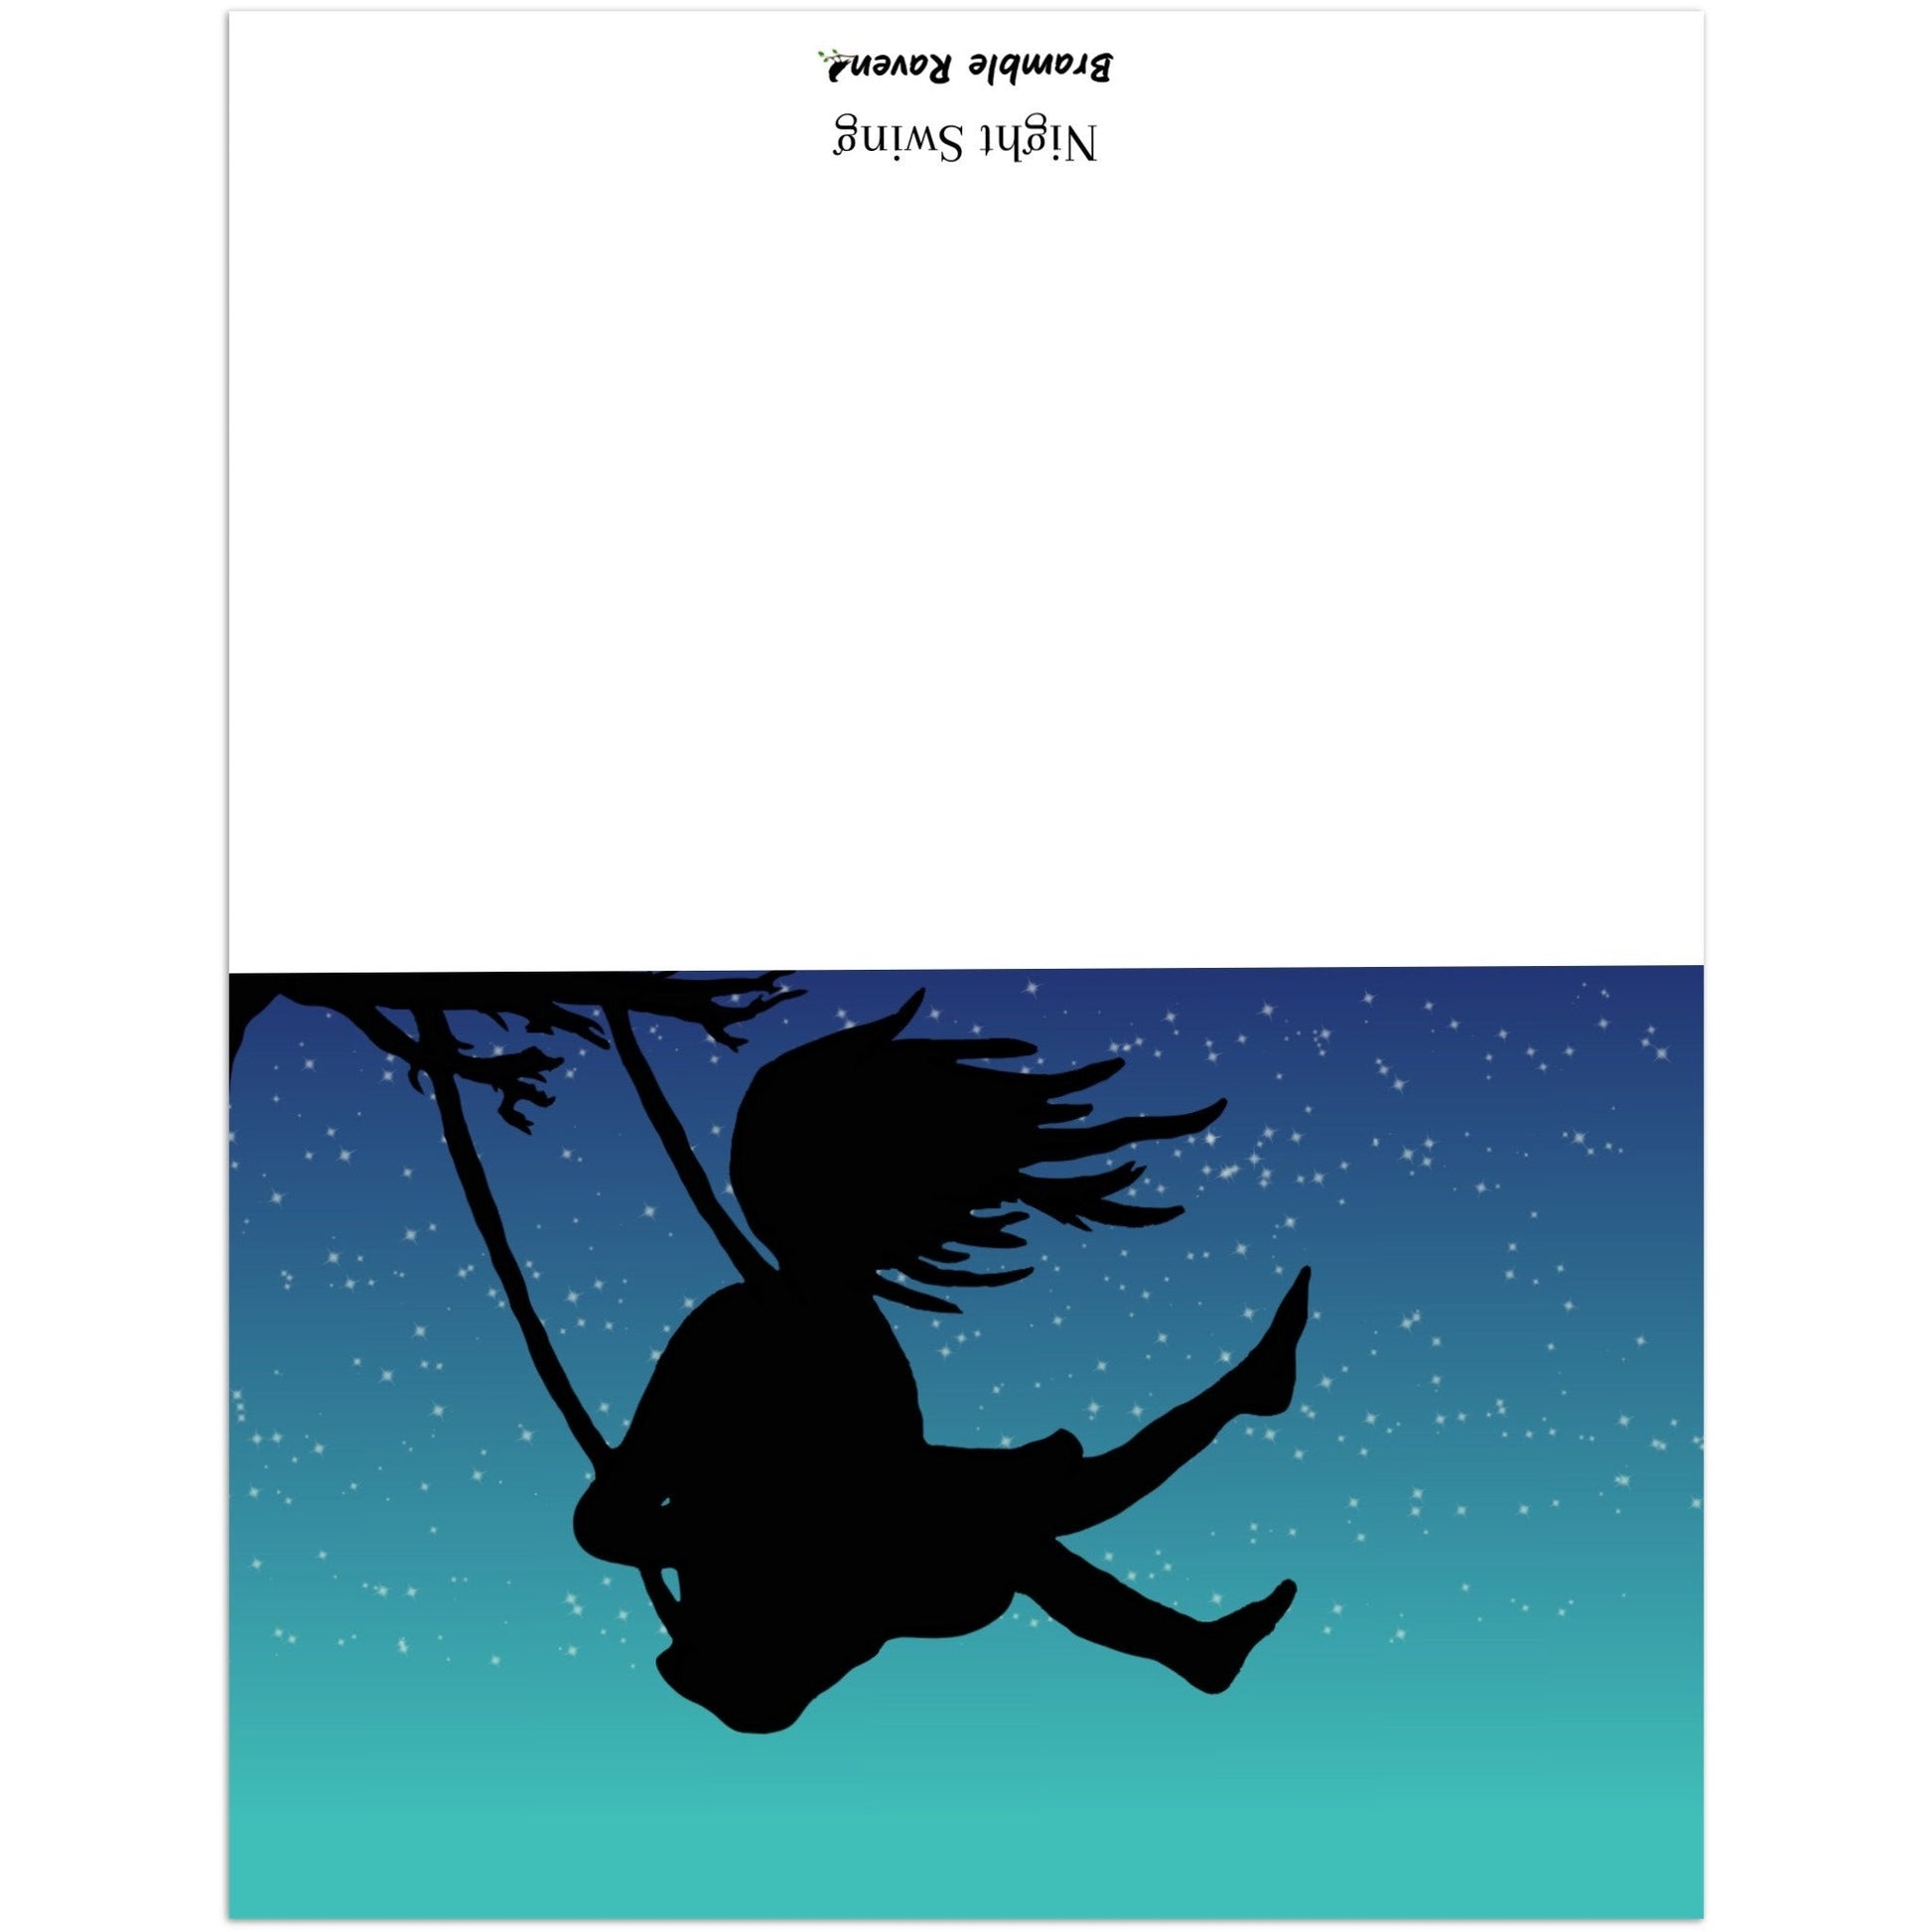 Pack of ten 5.5 by 8.5 inch Night Swing greeting cards and envelopes. Front shows silhouette of a girl in a tree swing against a starry summer night sky. Inside is blank. 